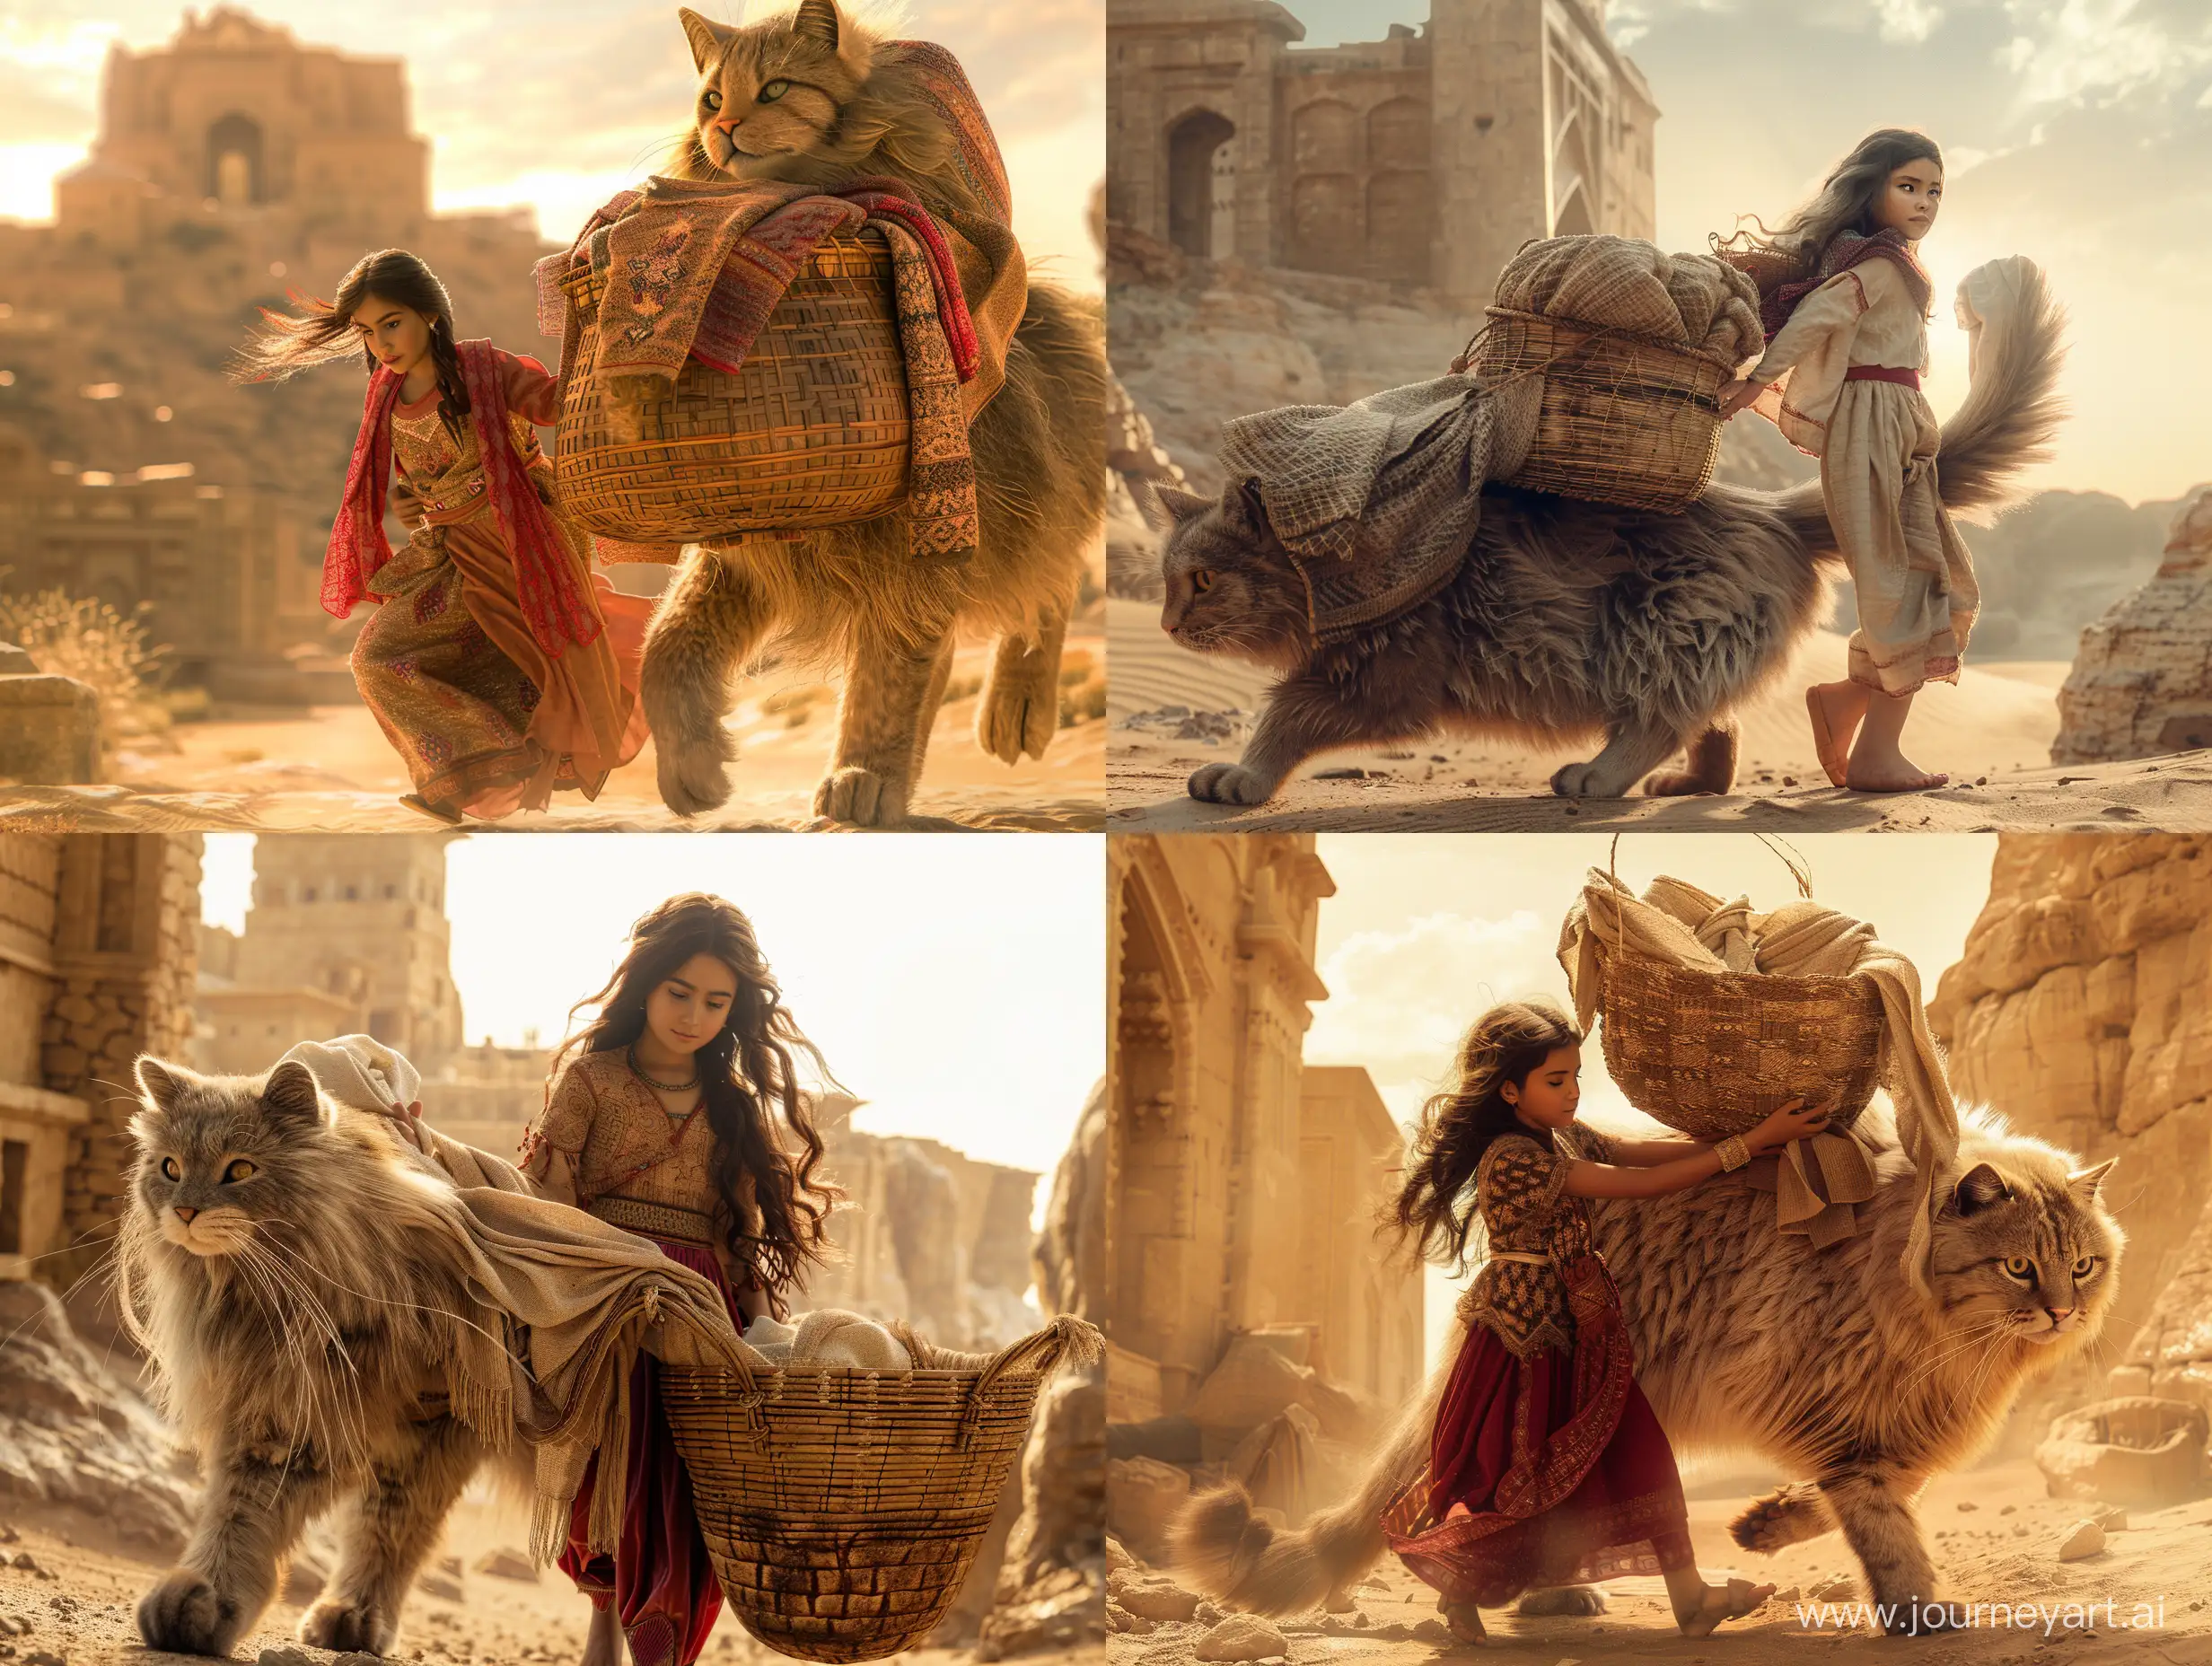 Persian-Girl-with-Woven-Shawls-on-Giant-Cat-Approaching-Citadel